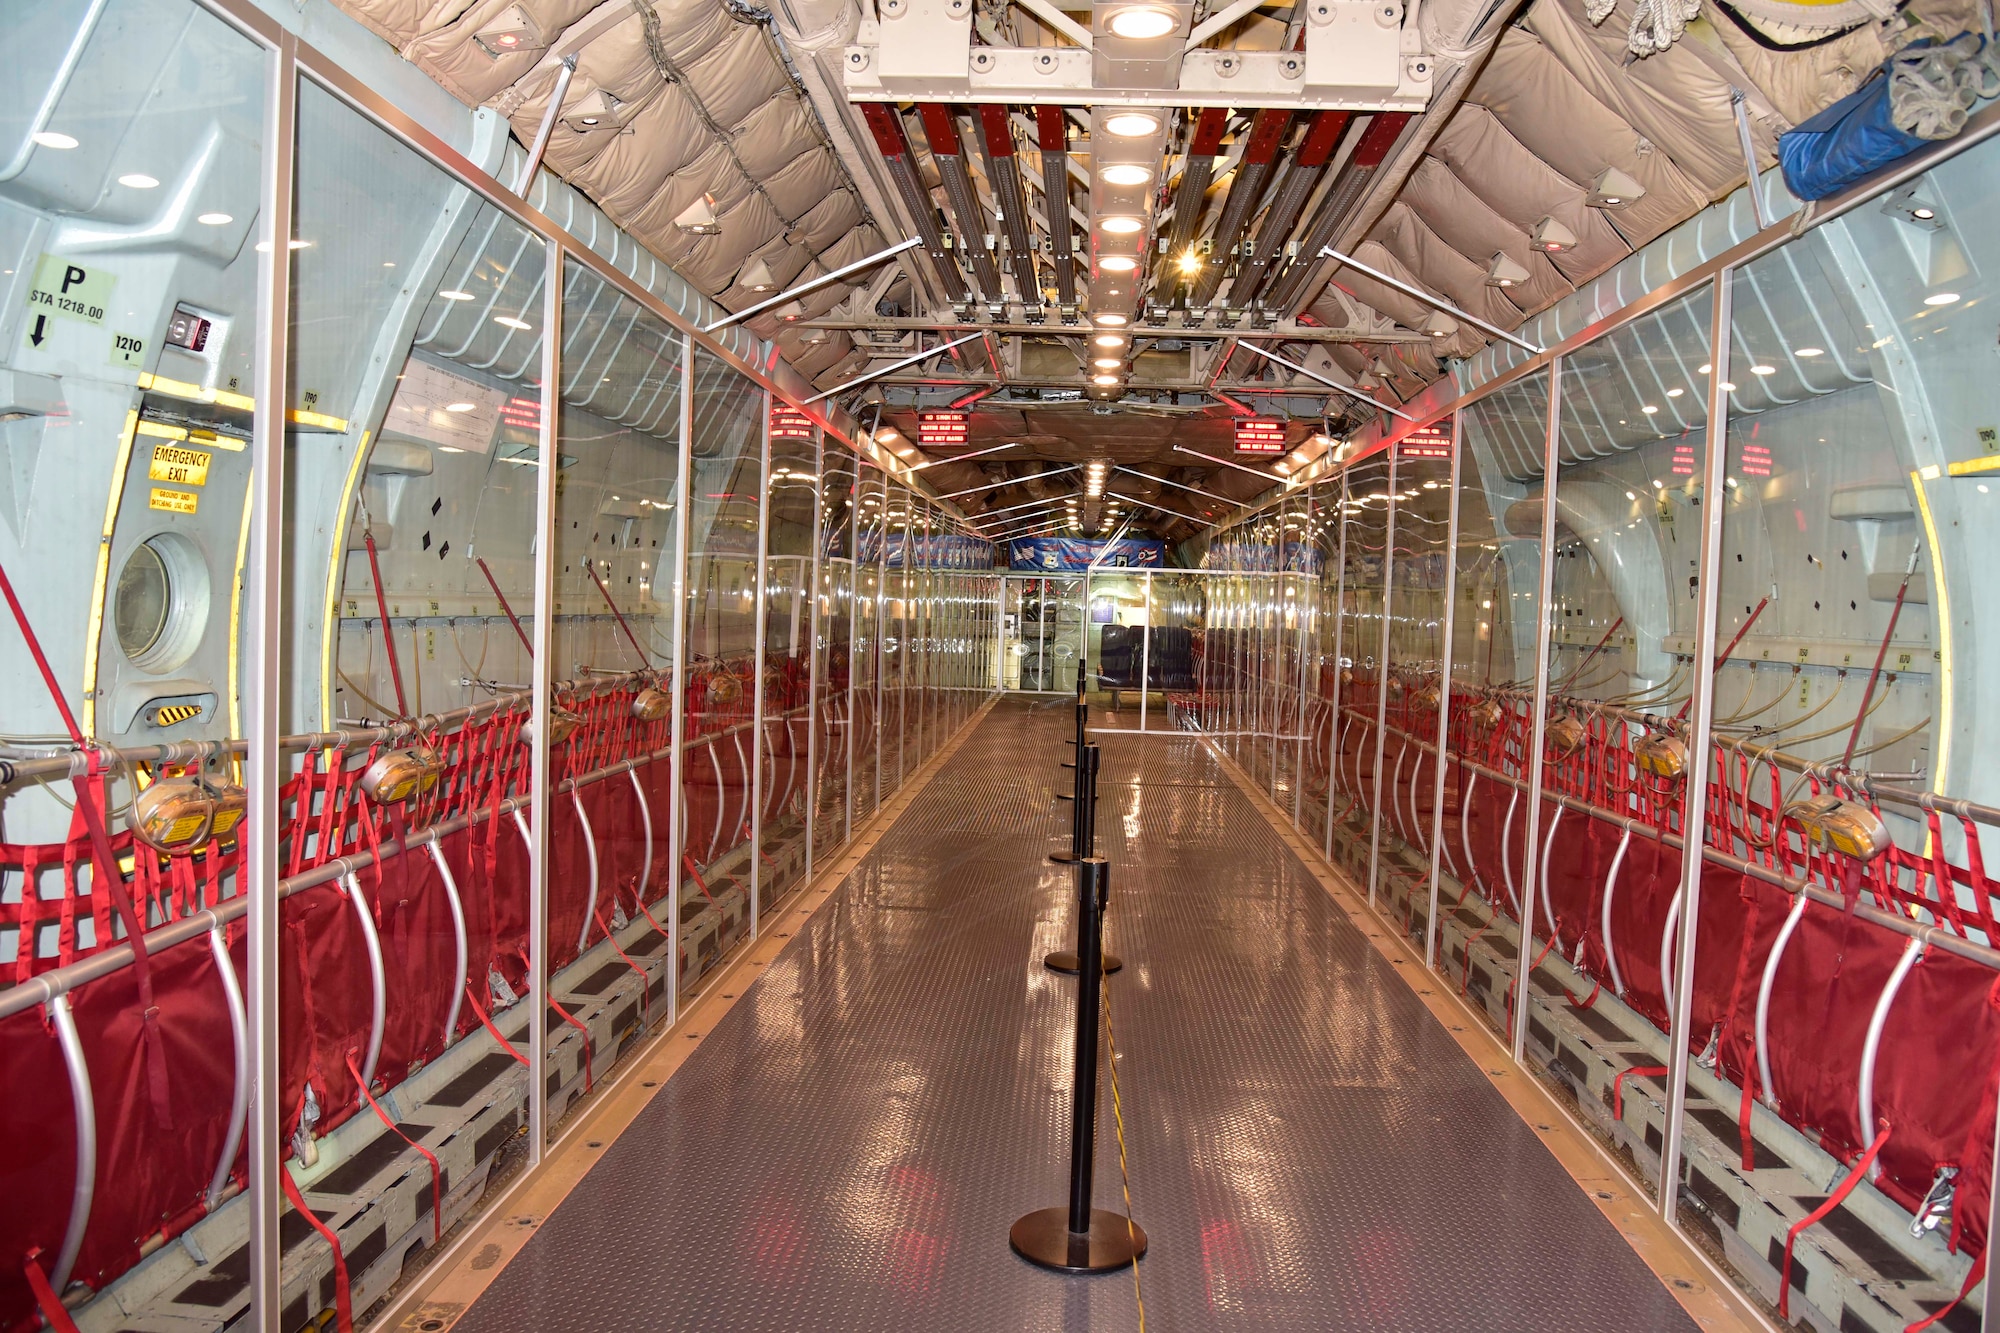 DAYTON, Ohio -- Interior view of the Lockheed C-141C Starlifter "Hanoi Taxi" in the Global Reach Gallery at the National Museum of the United States Air Force. (U.S. Air Force photo by Ken LaRock)